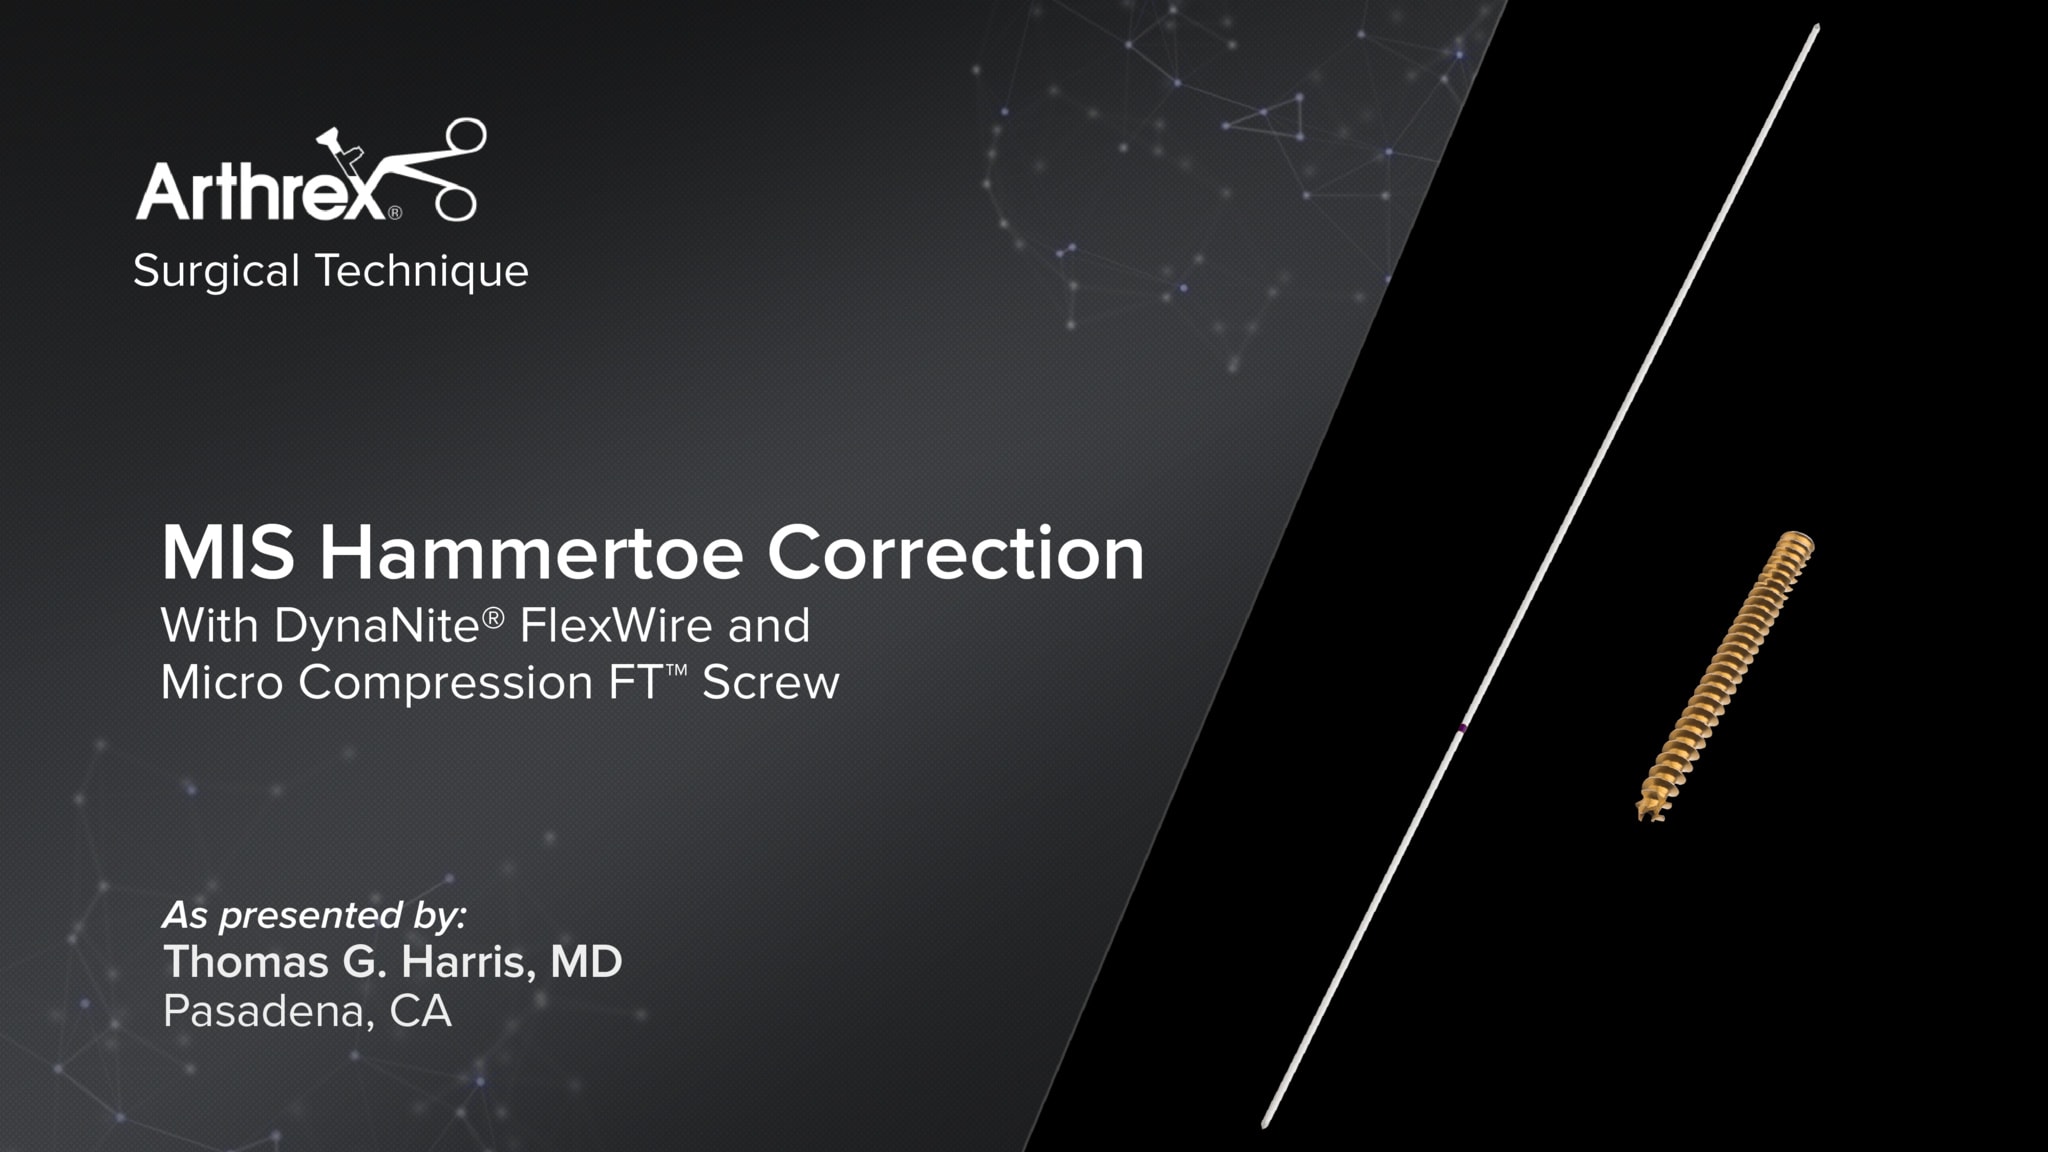 MIS Hammertoe Correction With DynaNite® FlexWire and Micro Compression FT™ Screw